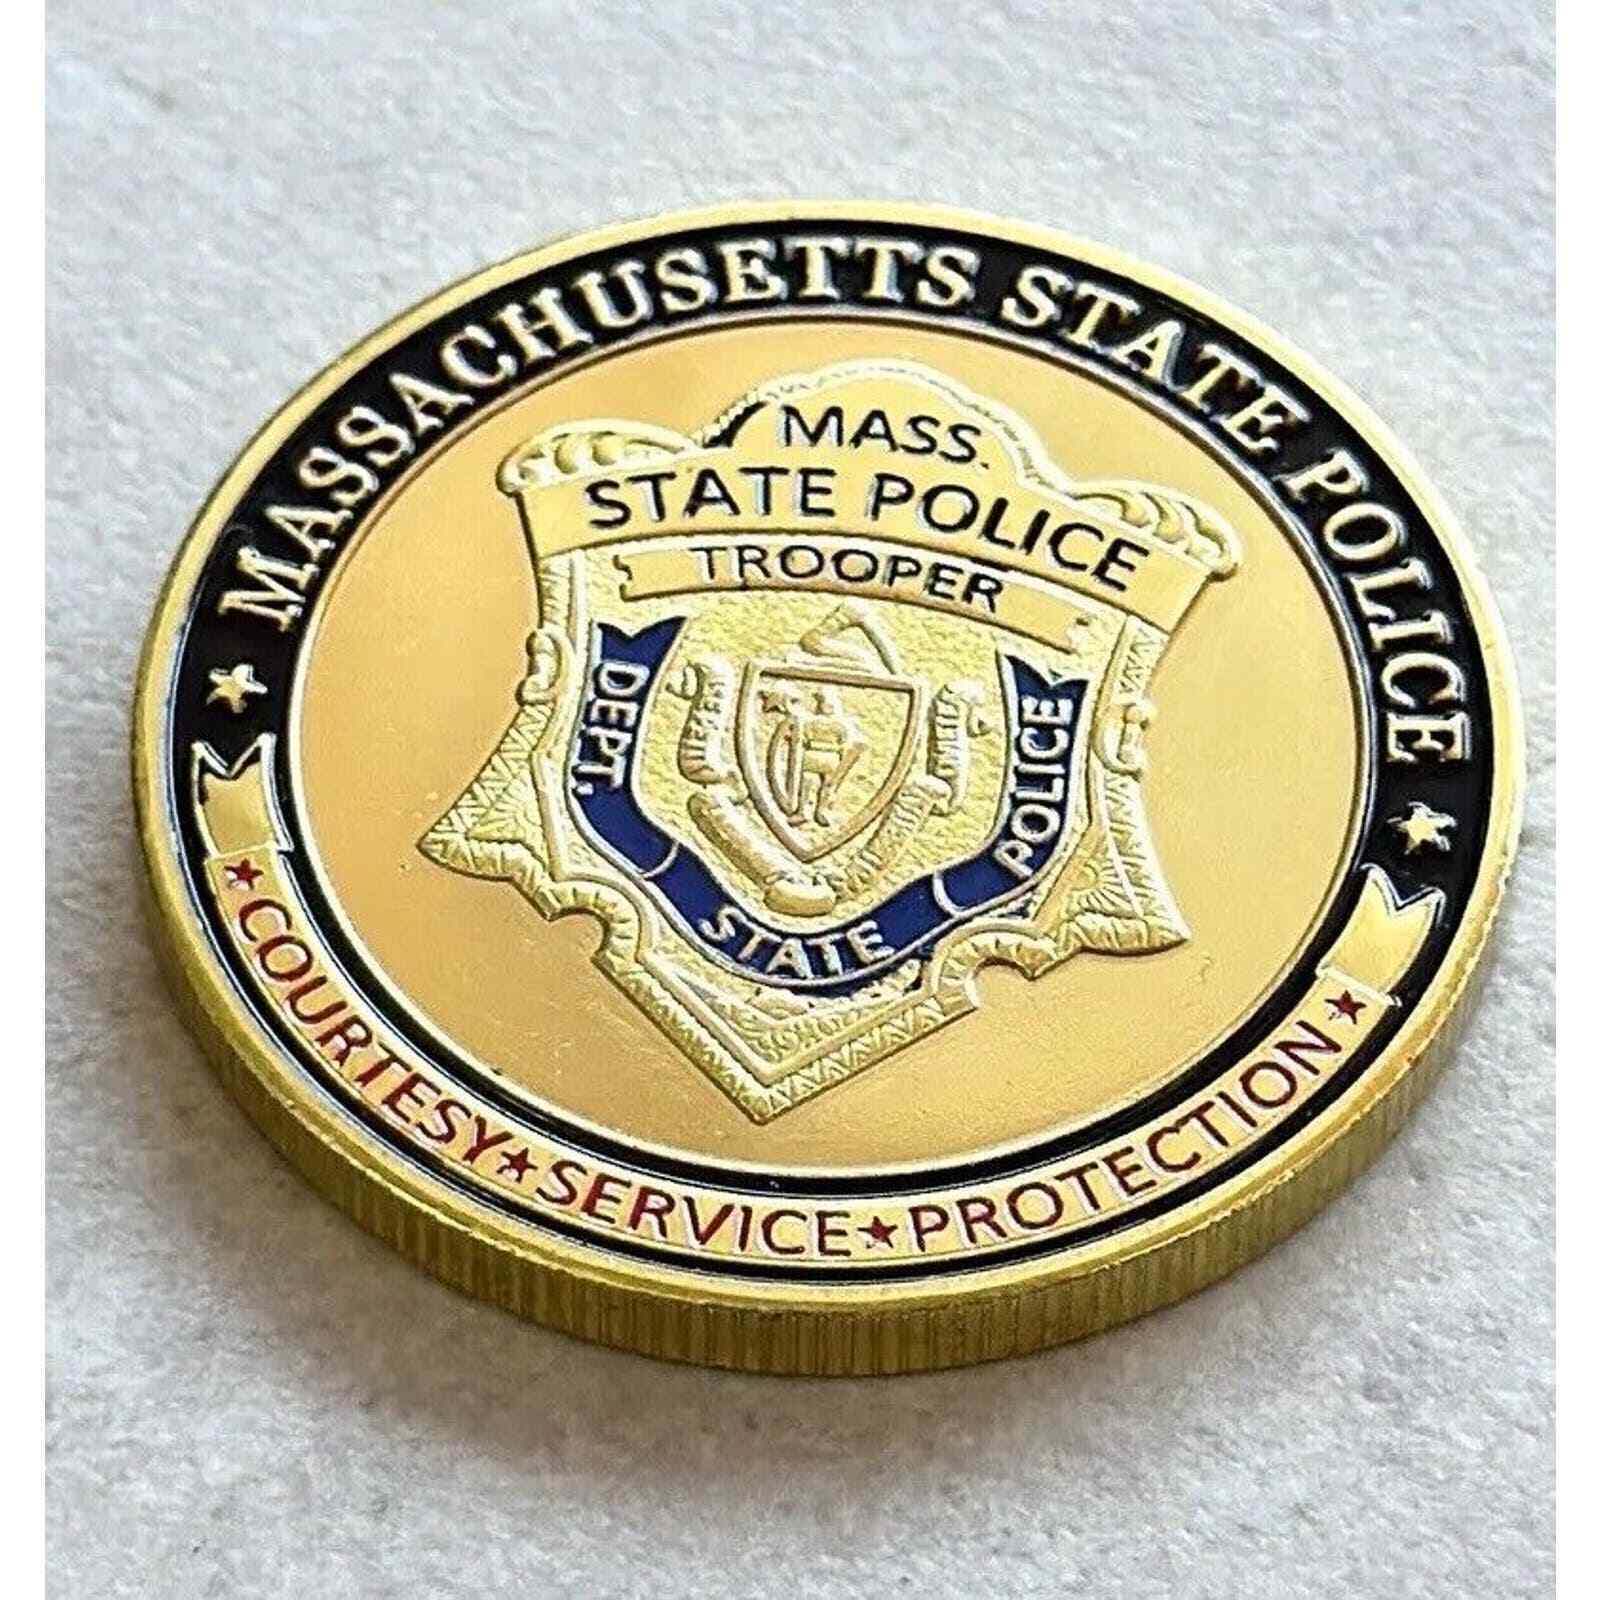 MASSACHUSETTS MA MASS STATE POLICE Officer Trooper Challenge Coin